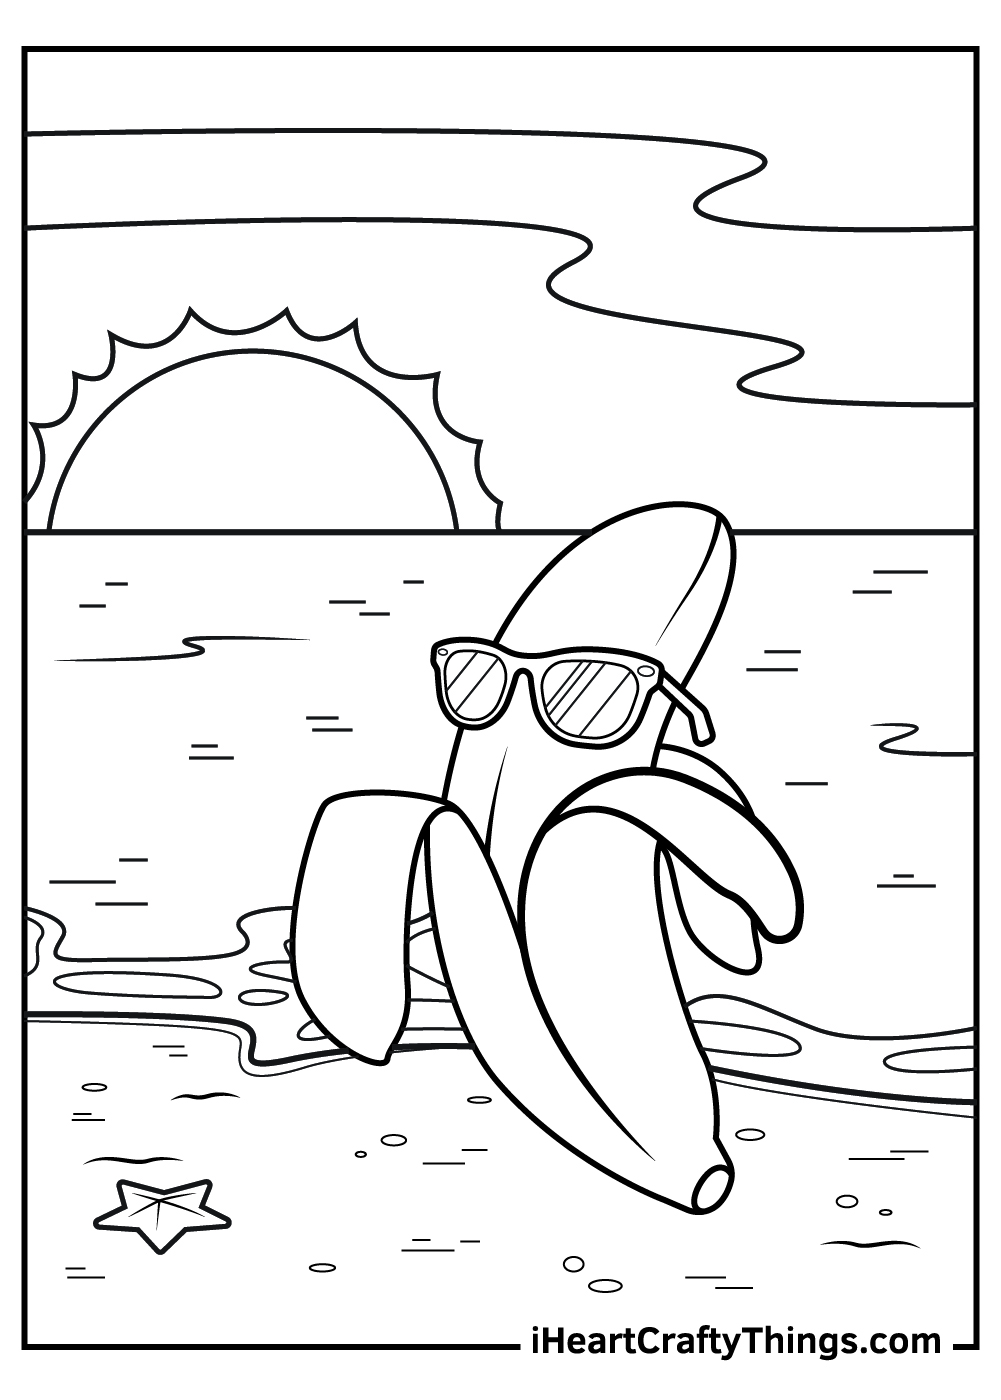 bananas coloring pages for adults free download